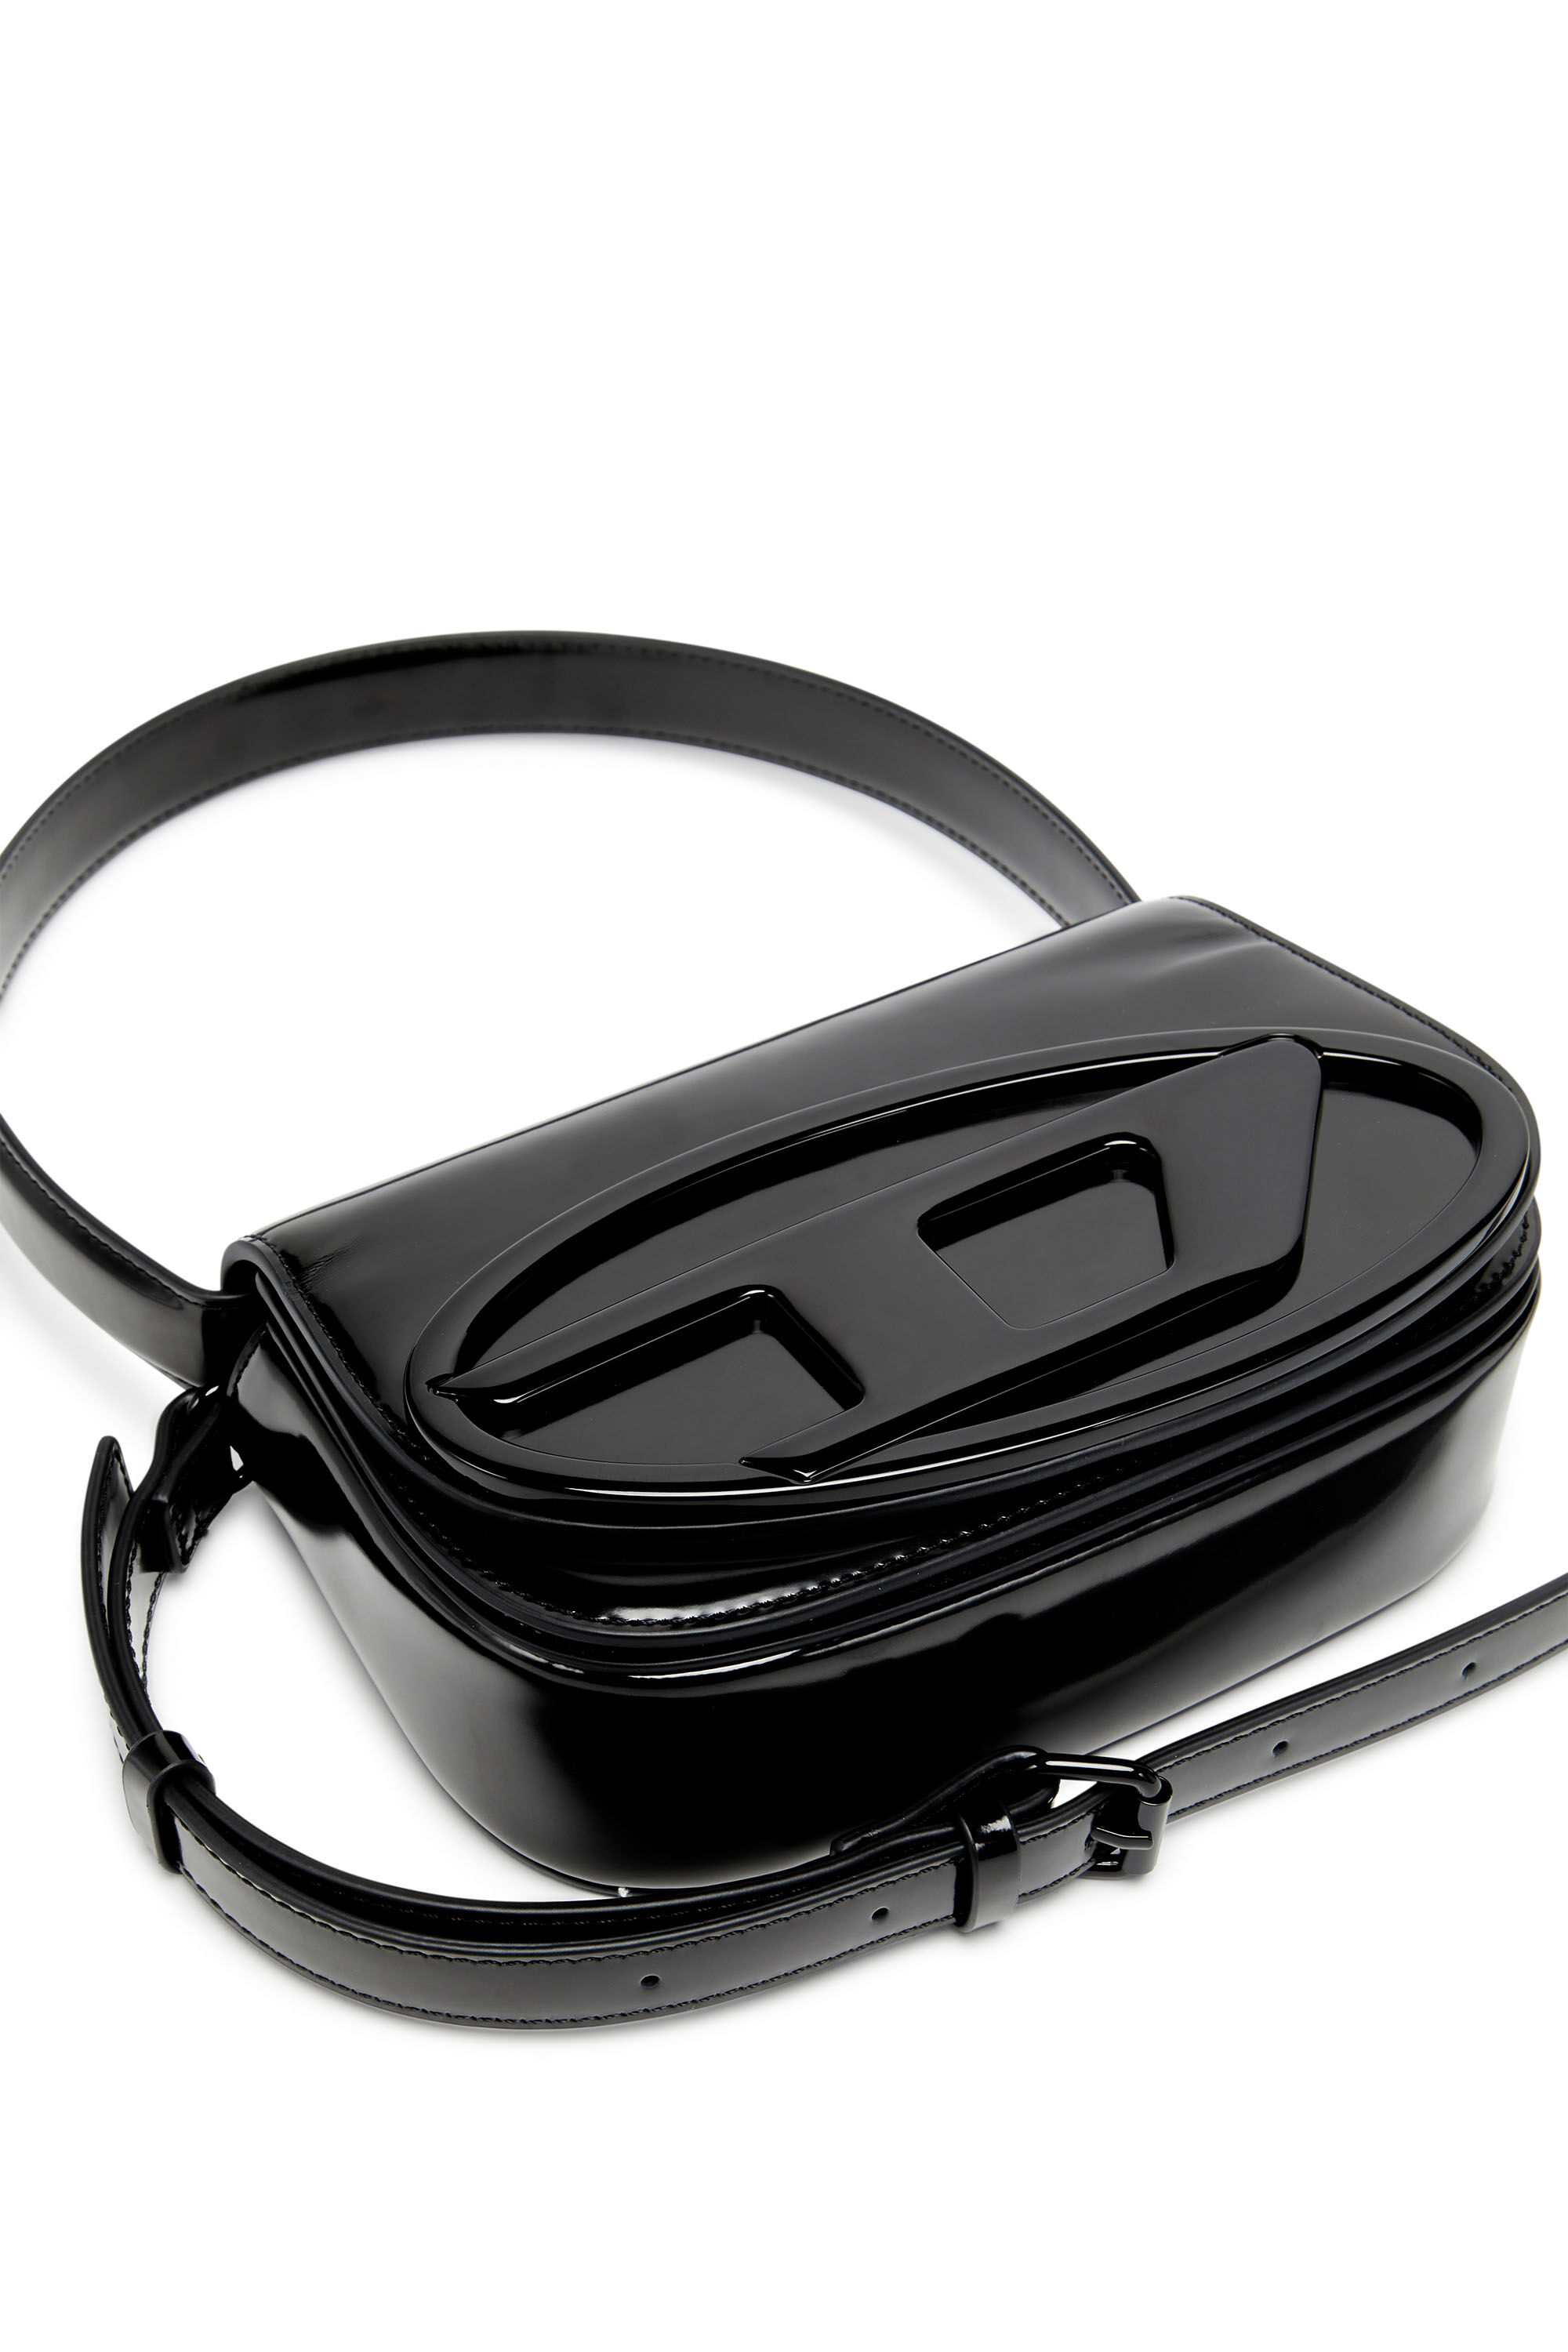 Women's 1DR-Iconic shoulder bag in mirrored leather | Black | Diesel